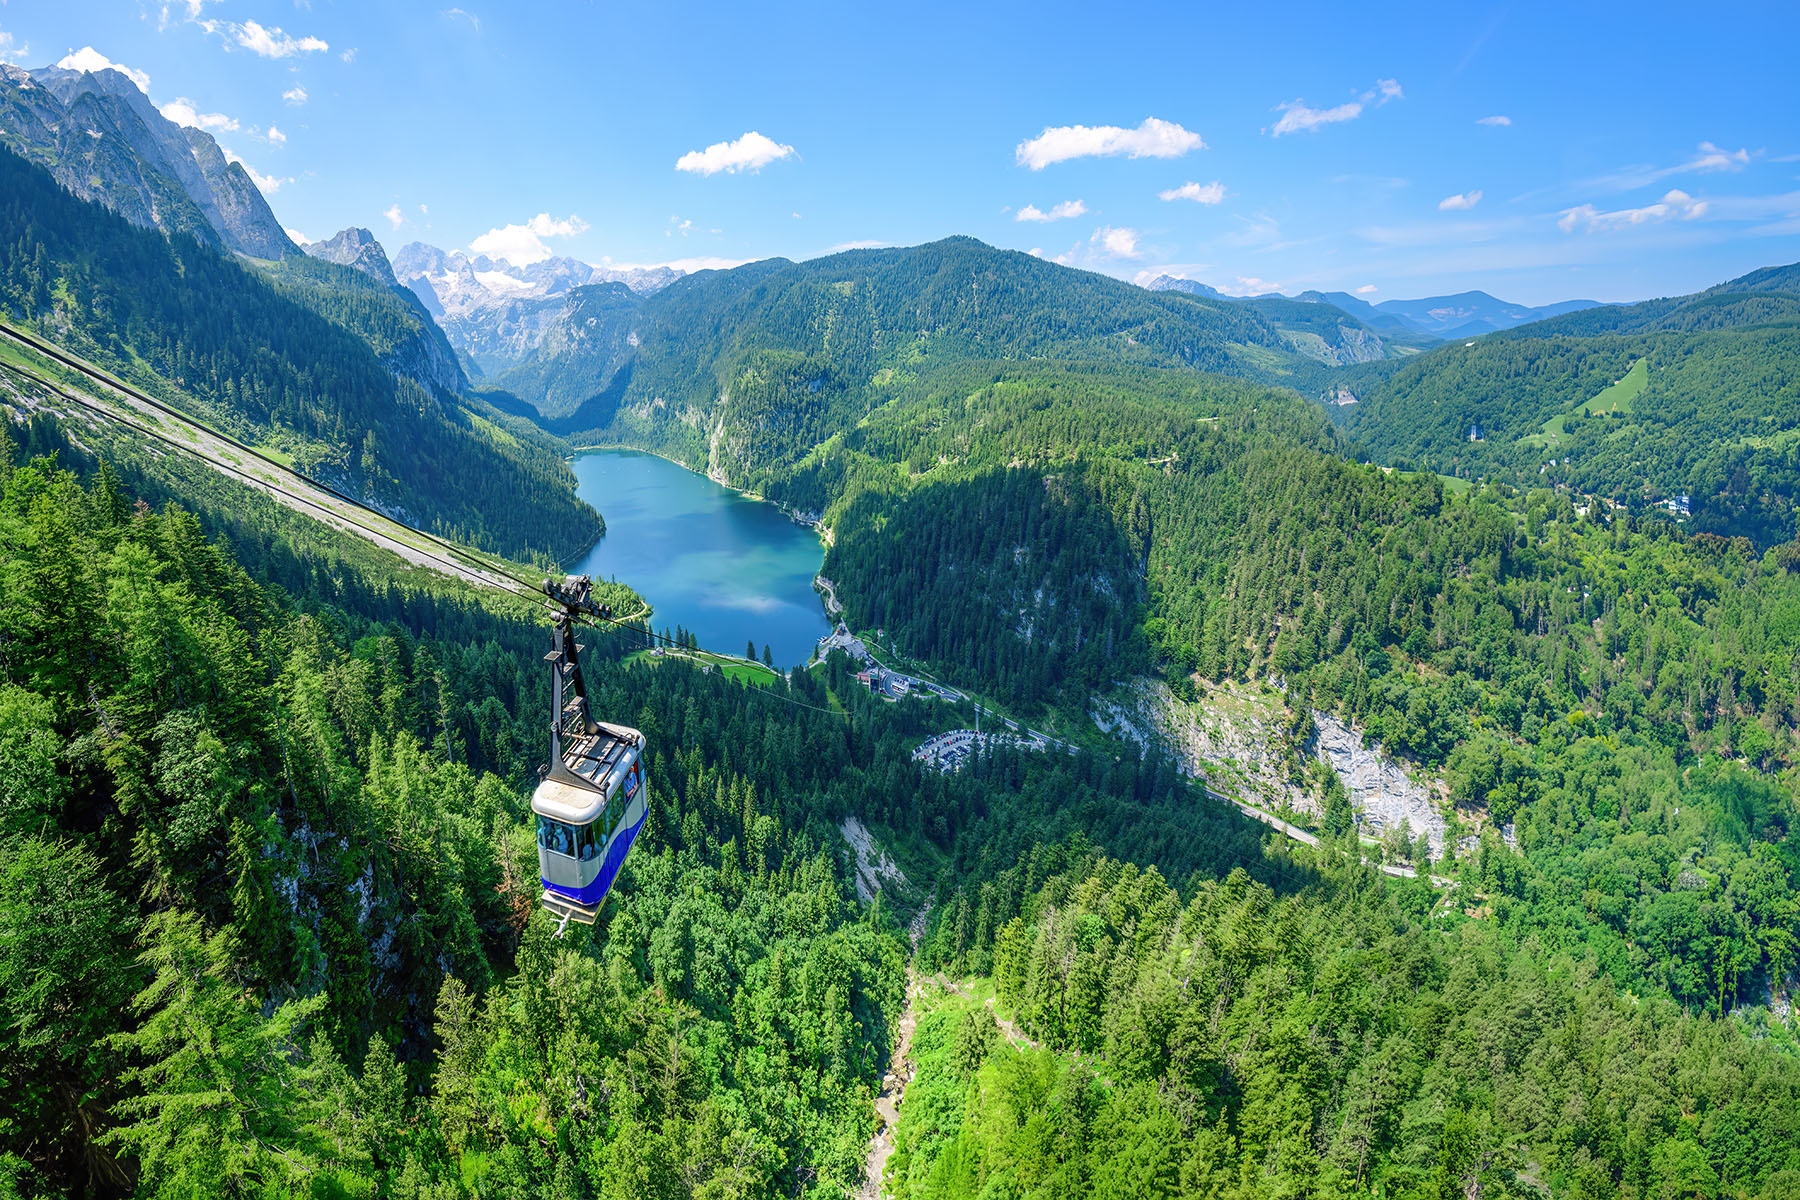 A cable car goes up and down across green mountains and a lake in Austria, Salzkammergut